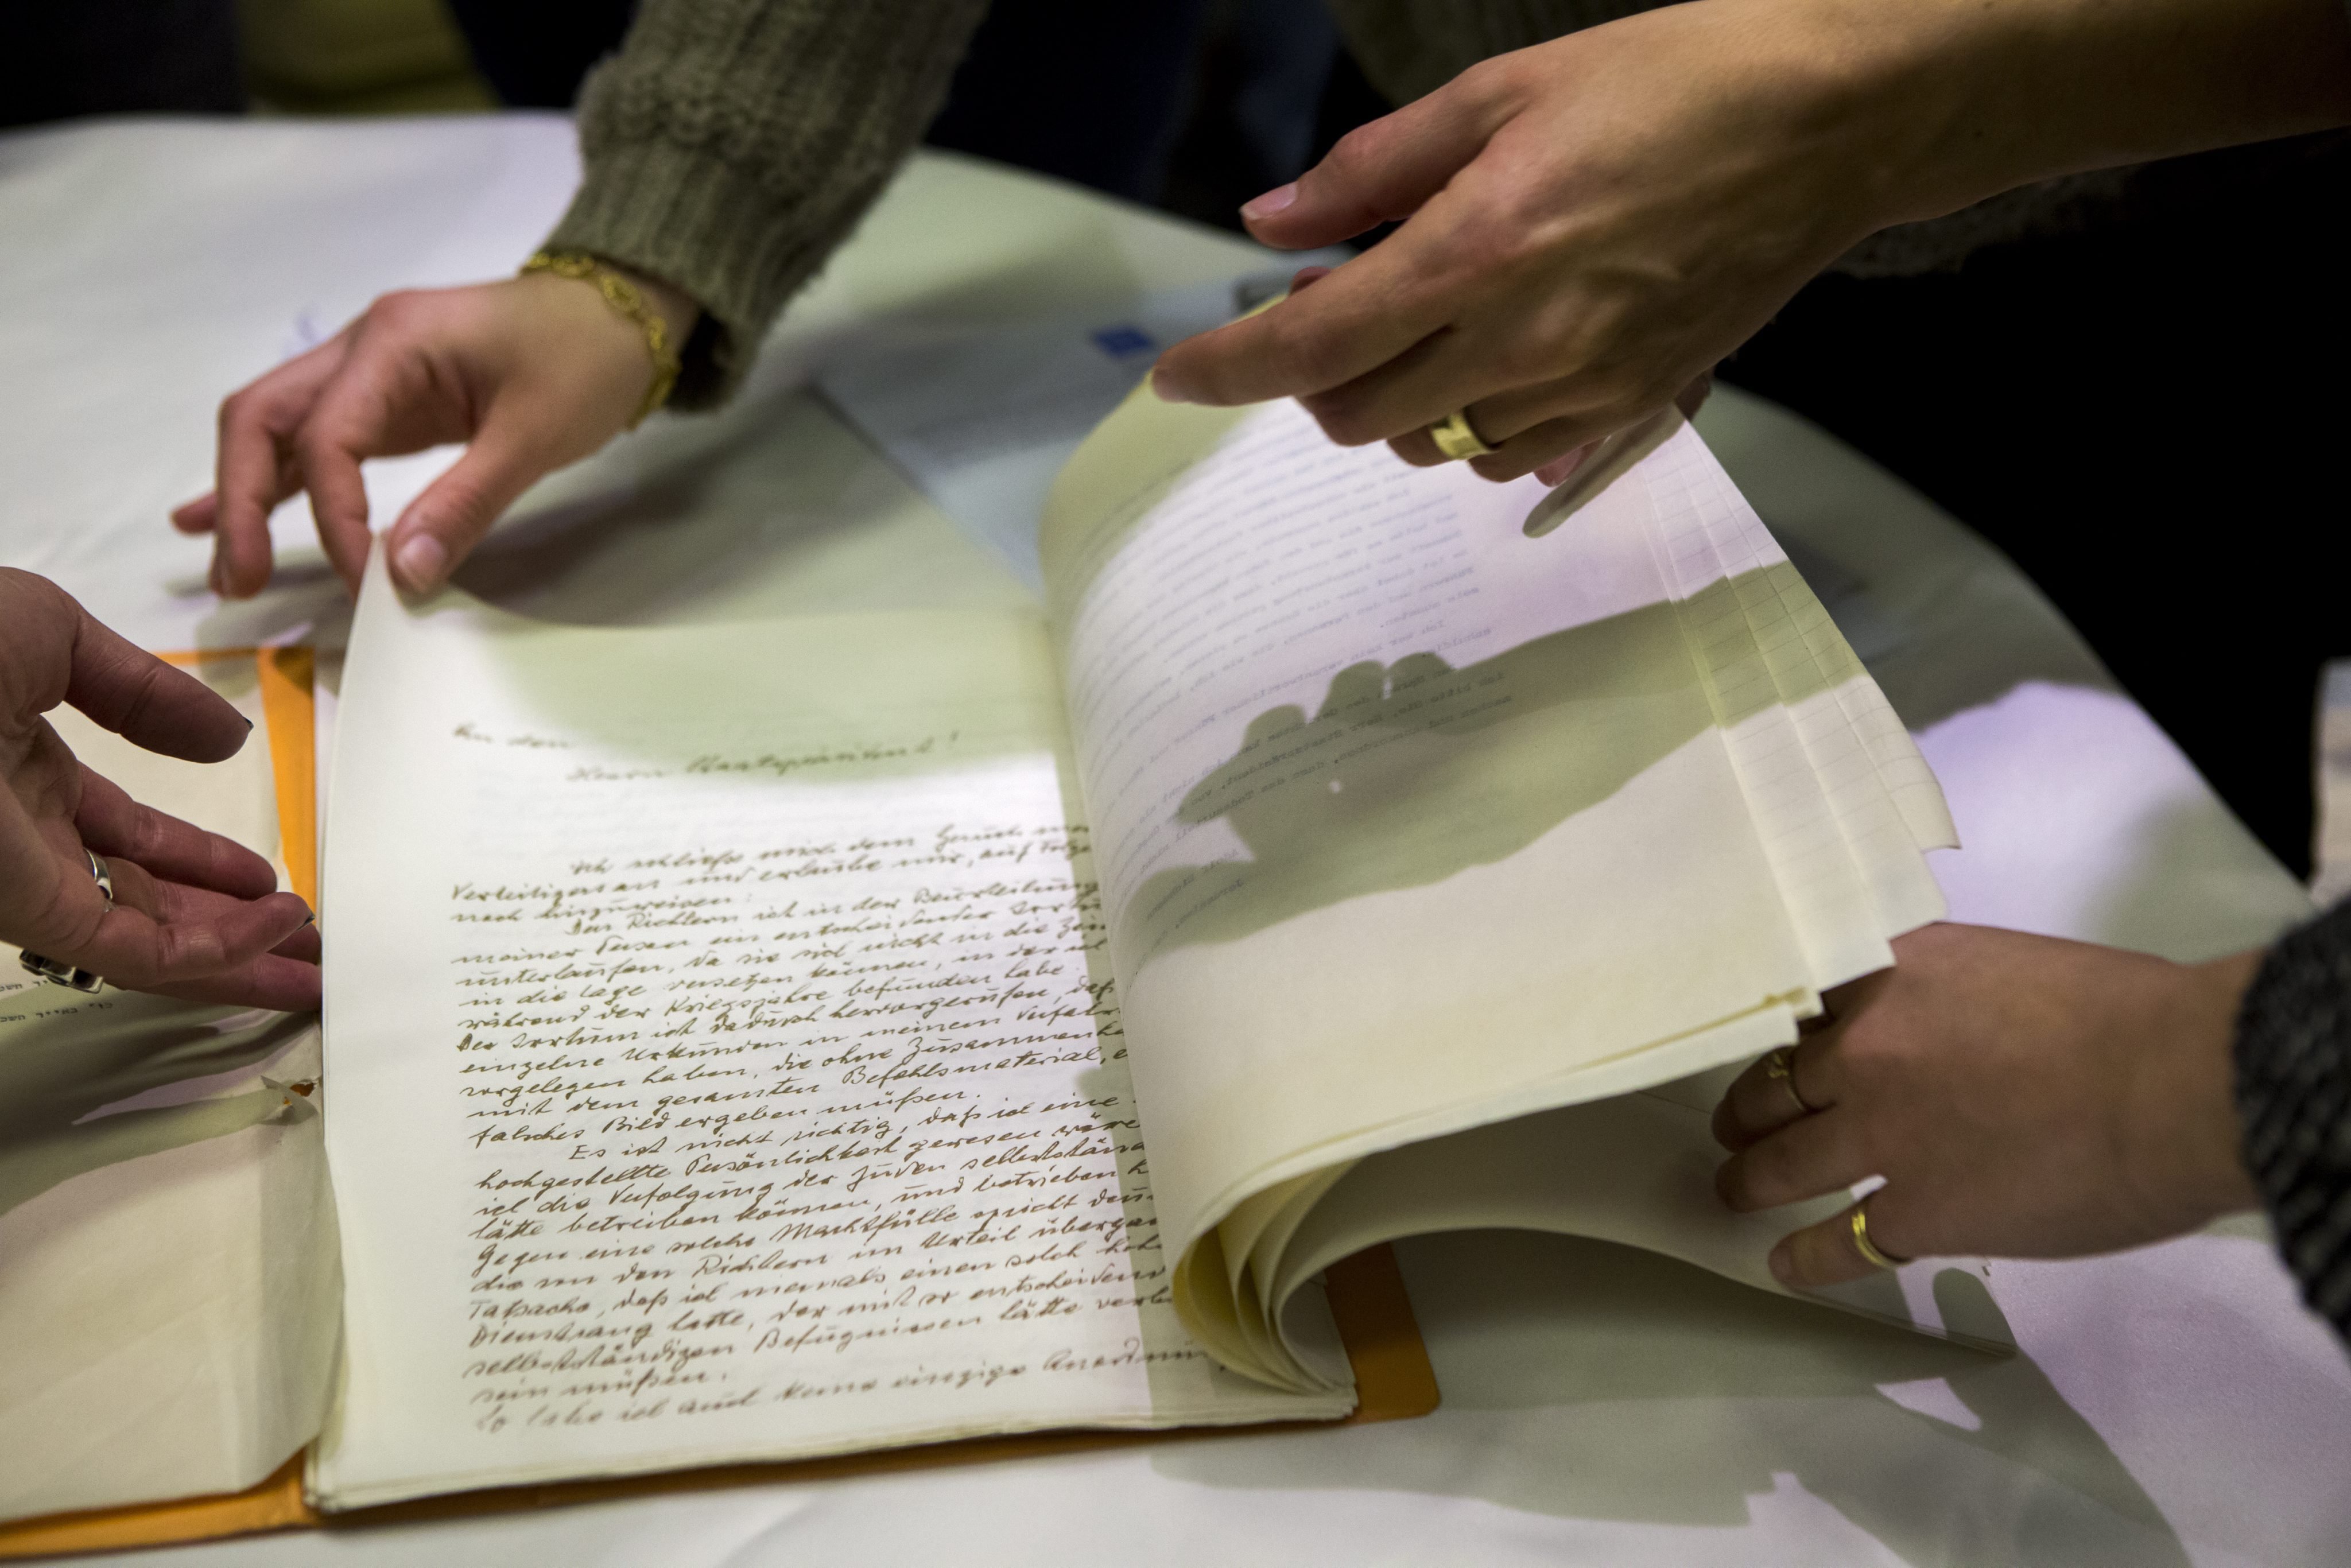 A newly found pardon request by Nazi Adolf Eichmann is displayed in the Israeli president's residence in Jerusalem, on Jan. 27, 2016. (Jim Hollander—EPA)